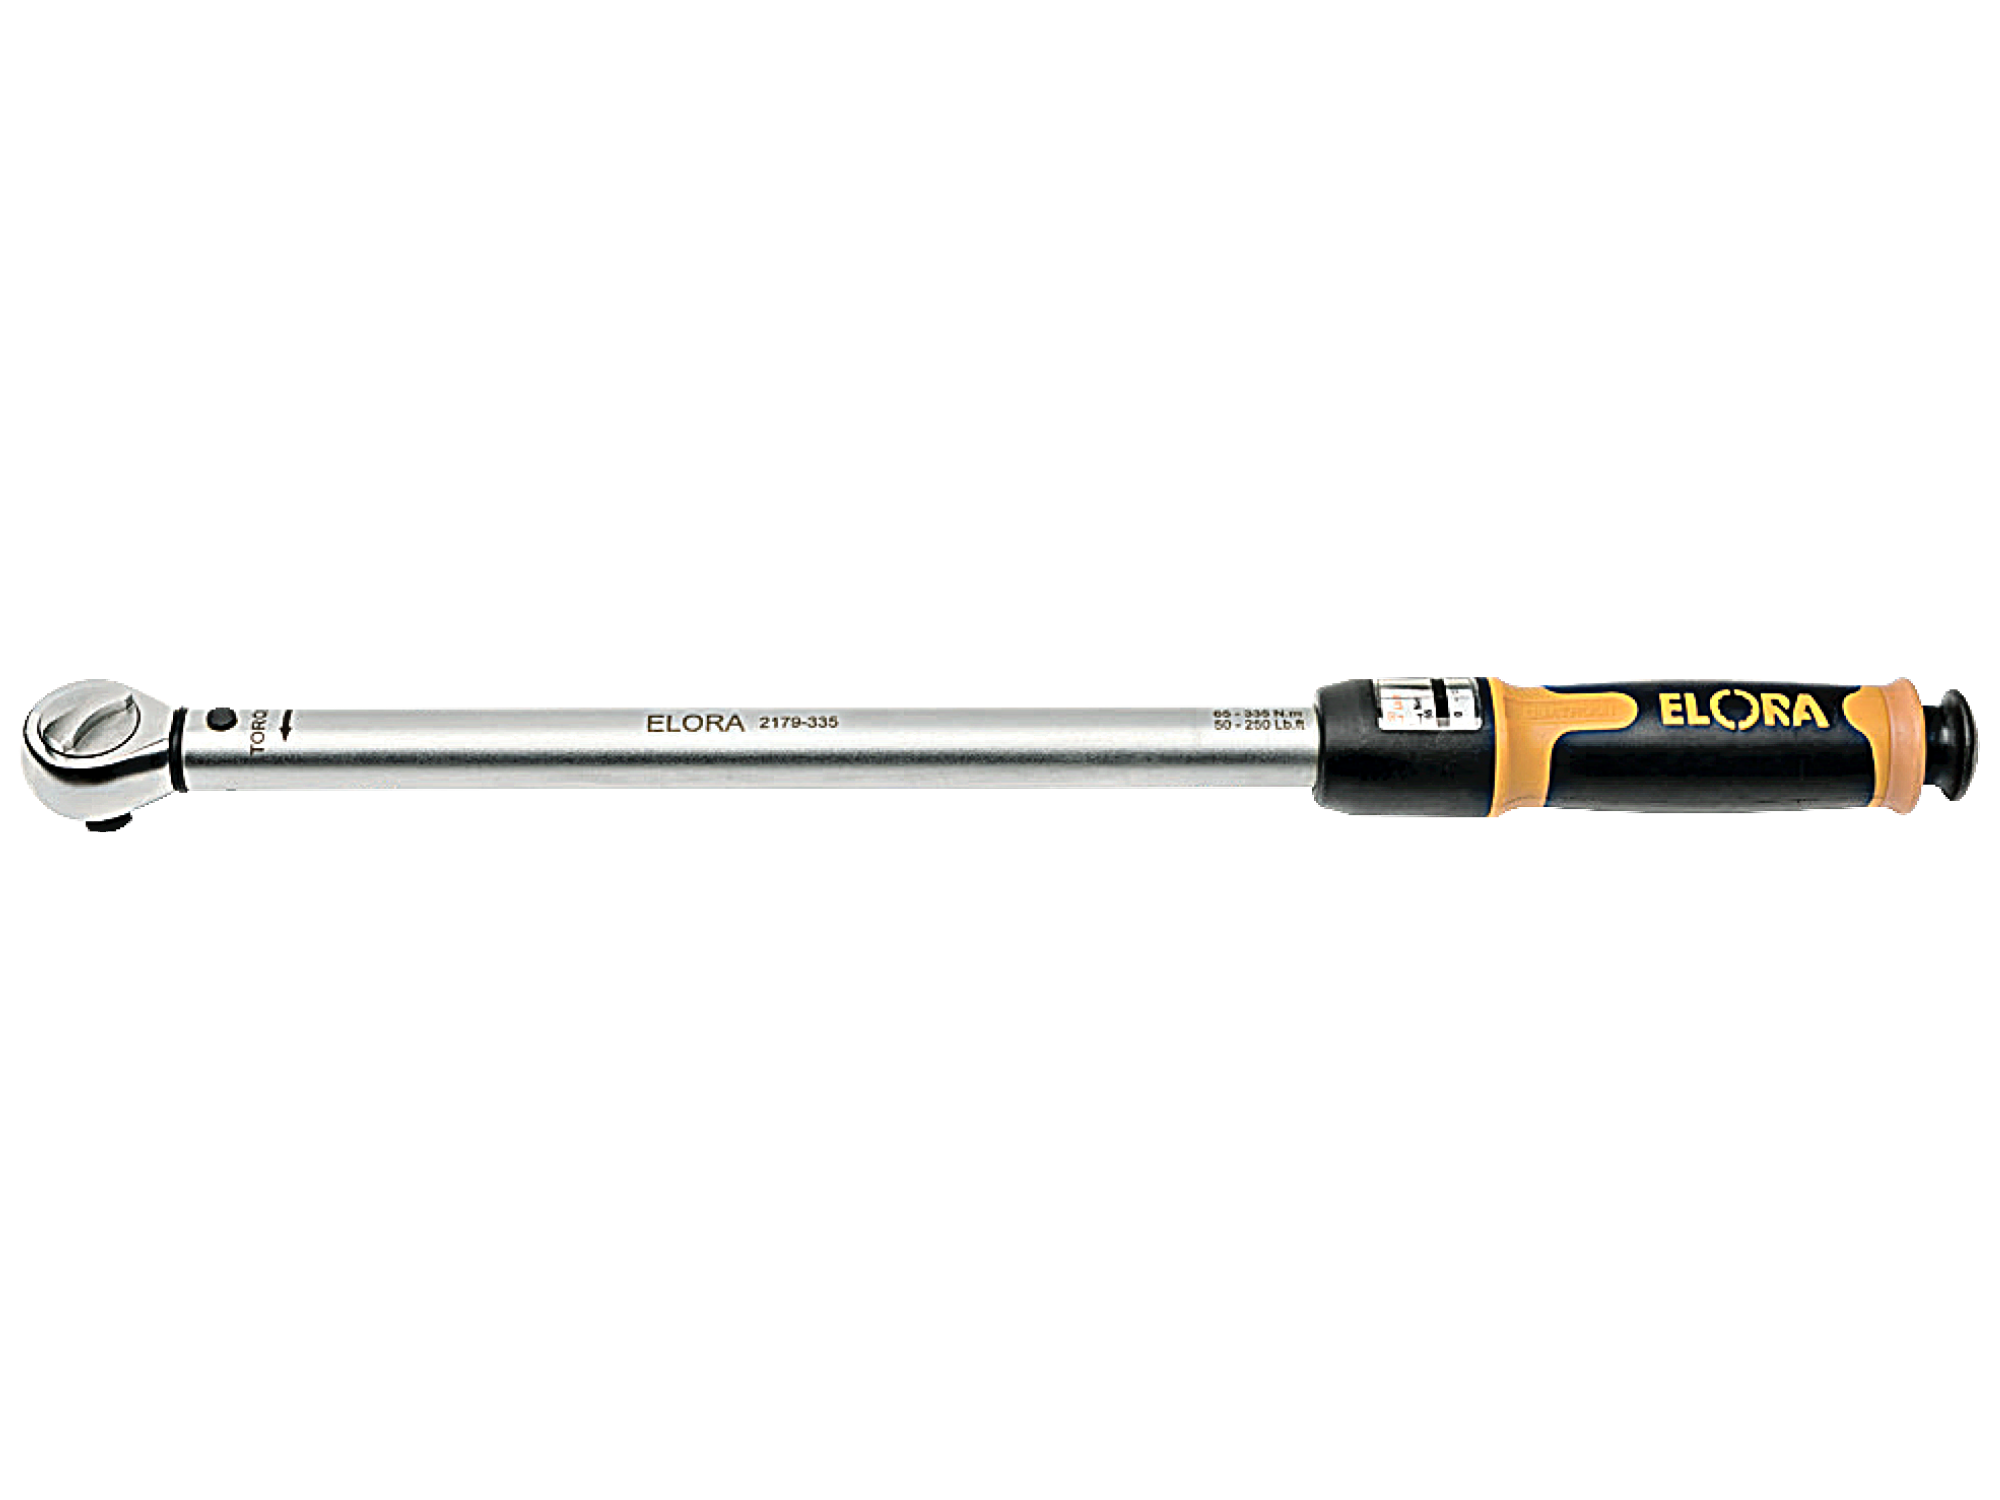 ELORA 2179-60 3/8" Torque Wrench With Vernier Scale (ELORA Tools) - Premium 3/8" Torque Wrench from ELORA - Shop now at Yew Aik.